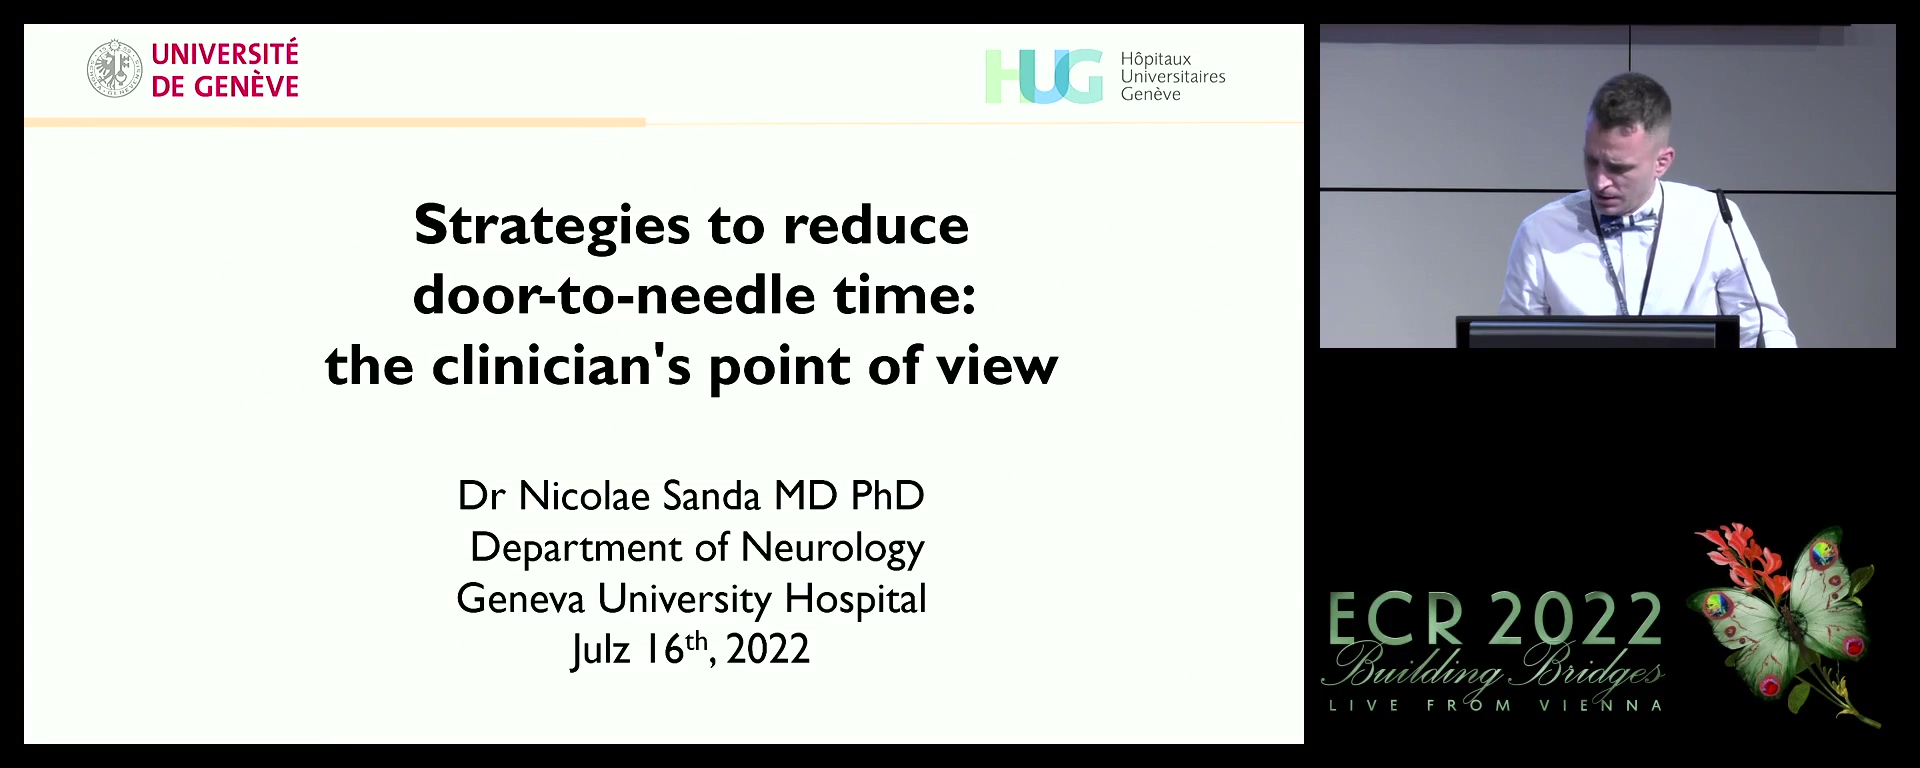 Strategies to reduce door-to-needle time: the clinician's point of view - Nicolae Sanda, Geneva / CH